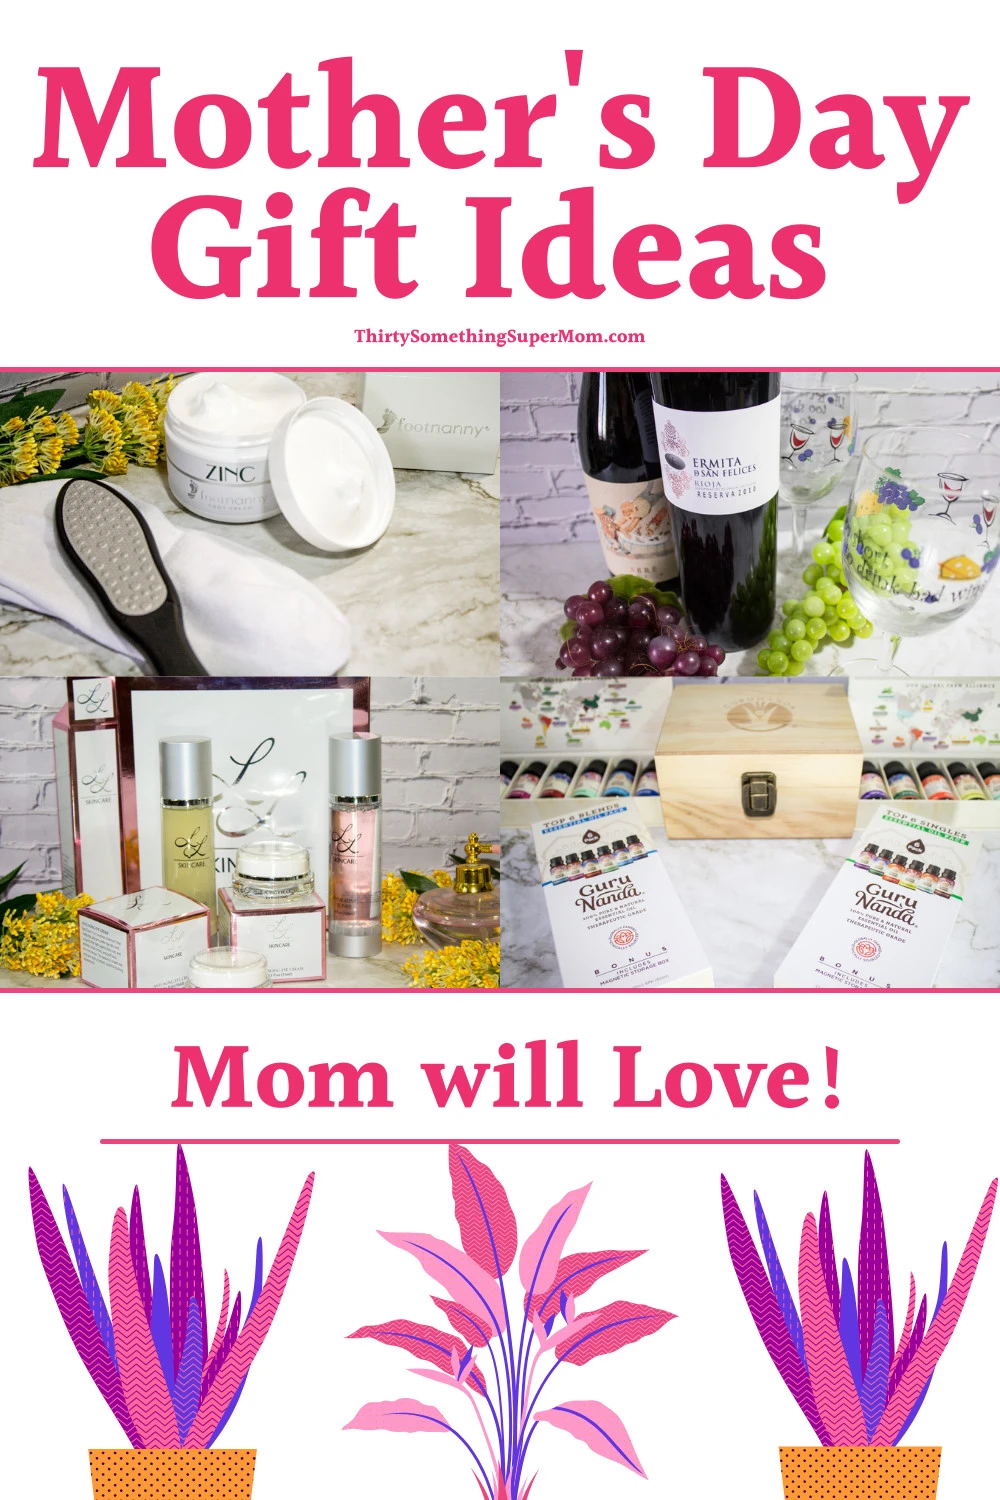 https://thirtysomethingsupermom.com/wp-content/uploads/2021/04/Mothers-Day-Gift-Ideas-mom-will-love.png.webp